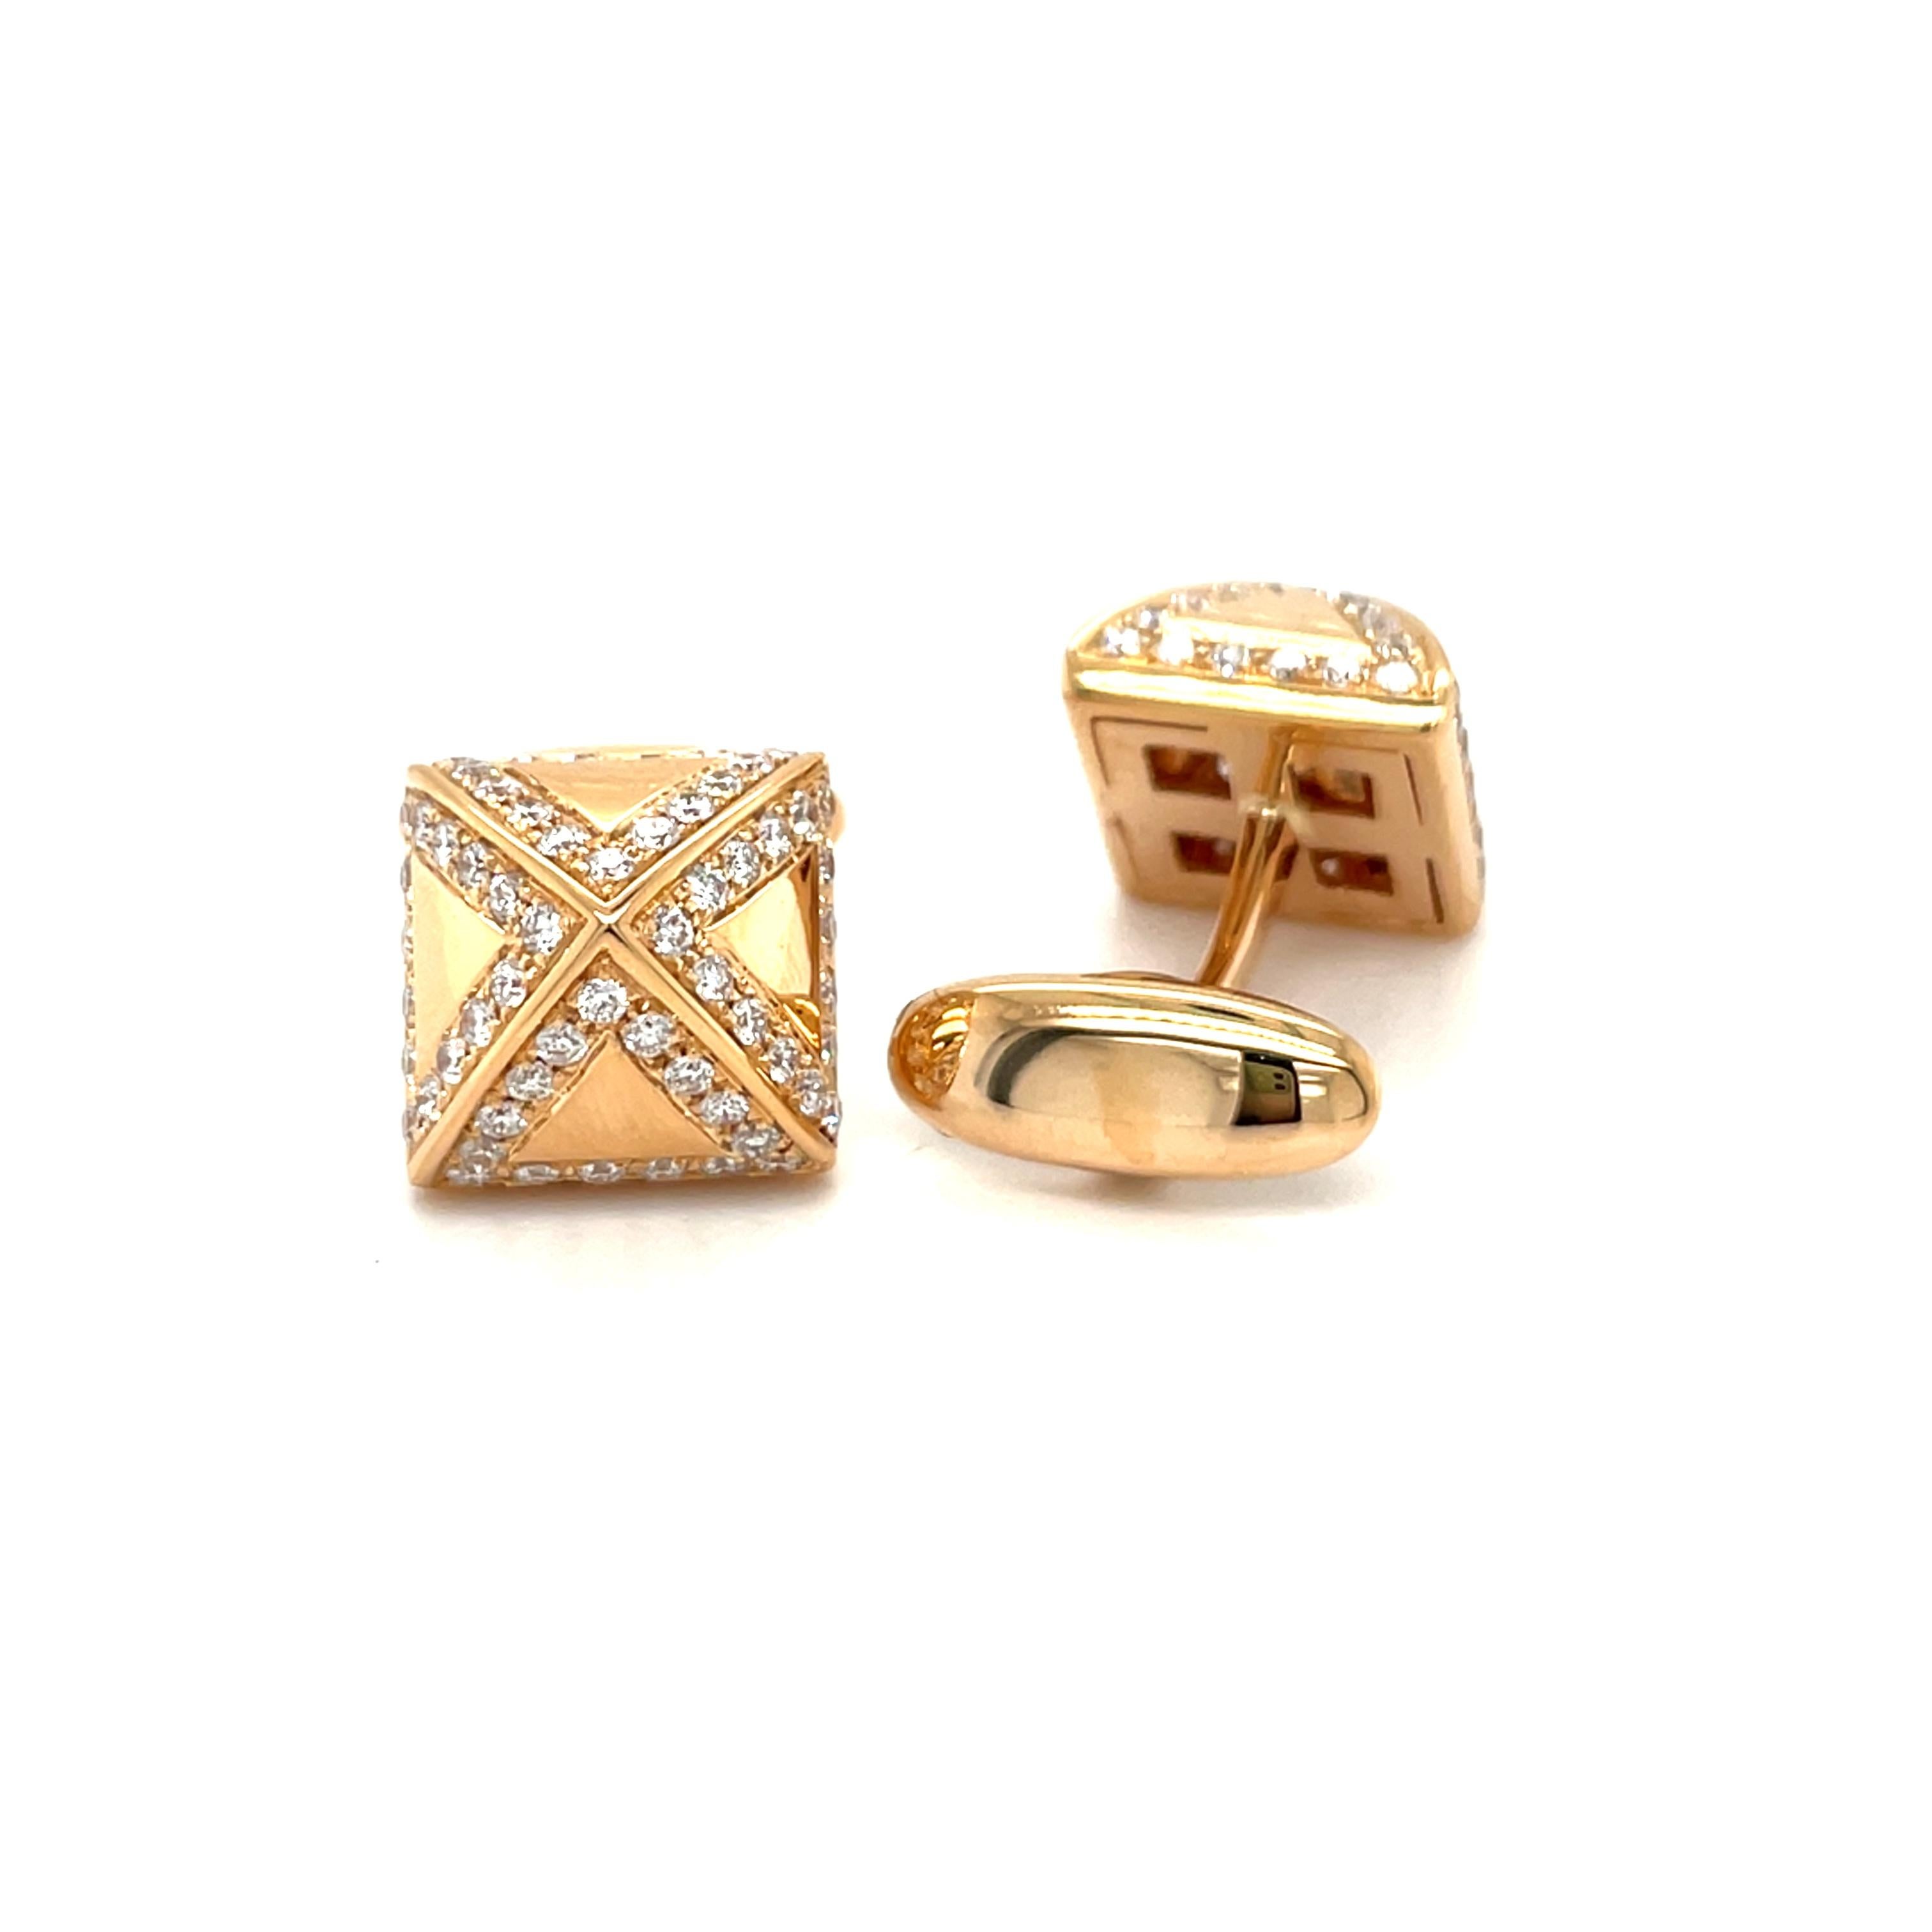 These  yelllow gold cufflinks are from Men's Collection. These cufflinks are decorated with diamonds G color VS clarity. The total amount of diamonds is 1.58 Carat. The dimensions of the cufflinks are 1.2cm x 1.2cm. These cufflinks are a perfect